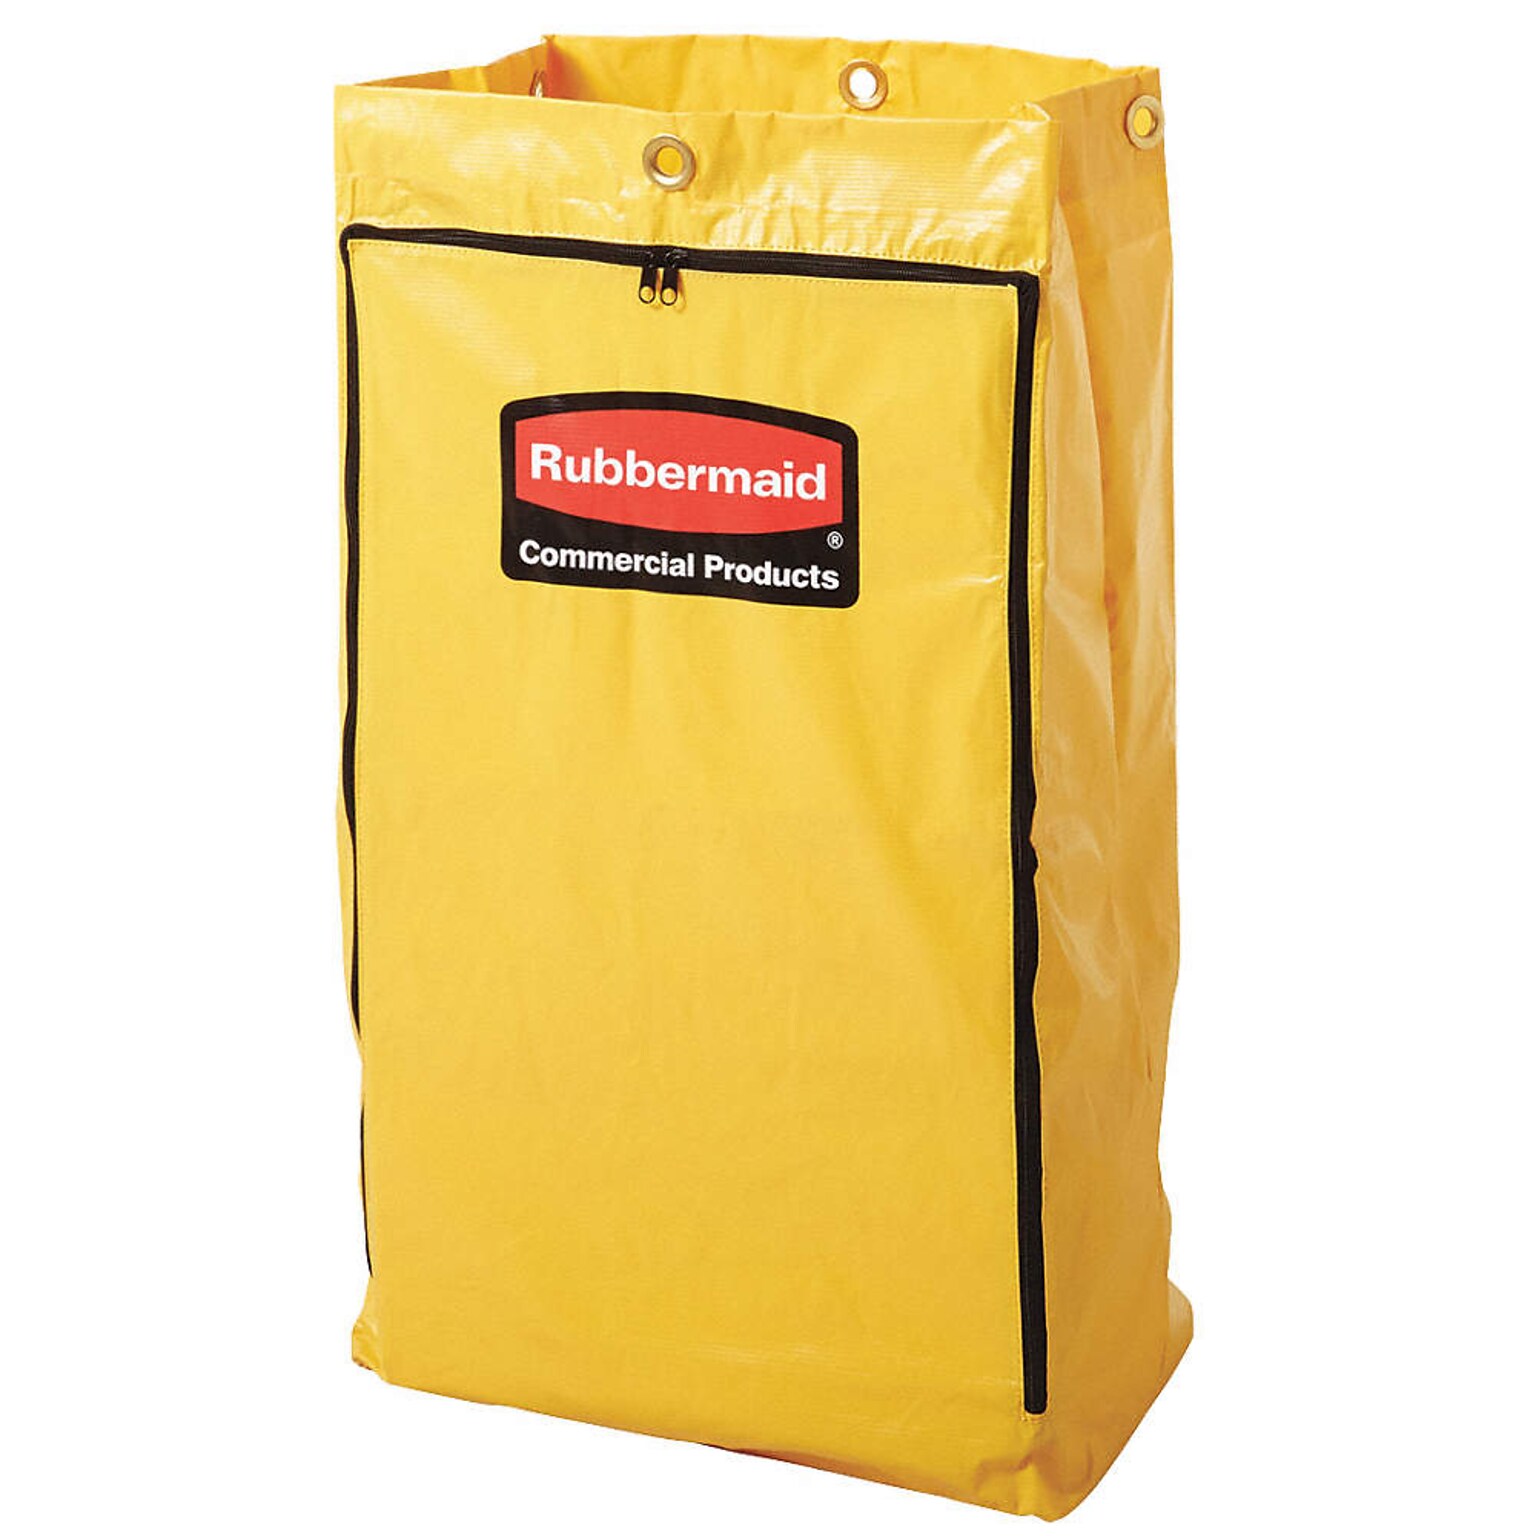 Rubbermaid Commercial Zippered Vinyl Cleaning Cart Bag, 24gal, 17-1/4W x 10-1/2D x 30-1/2H, Yellowd